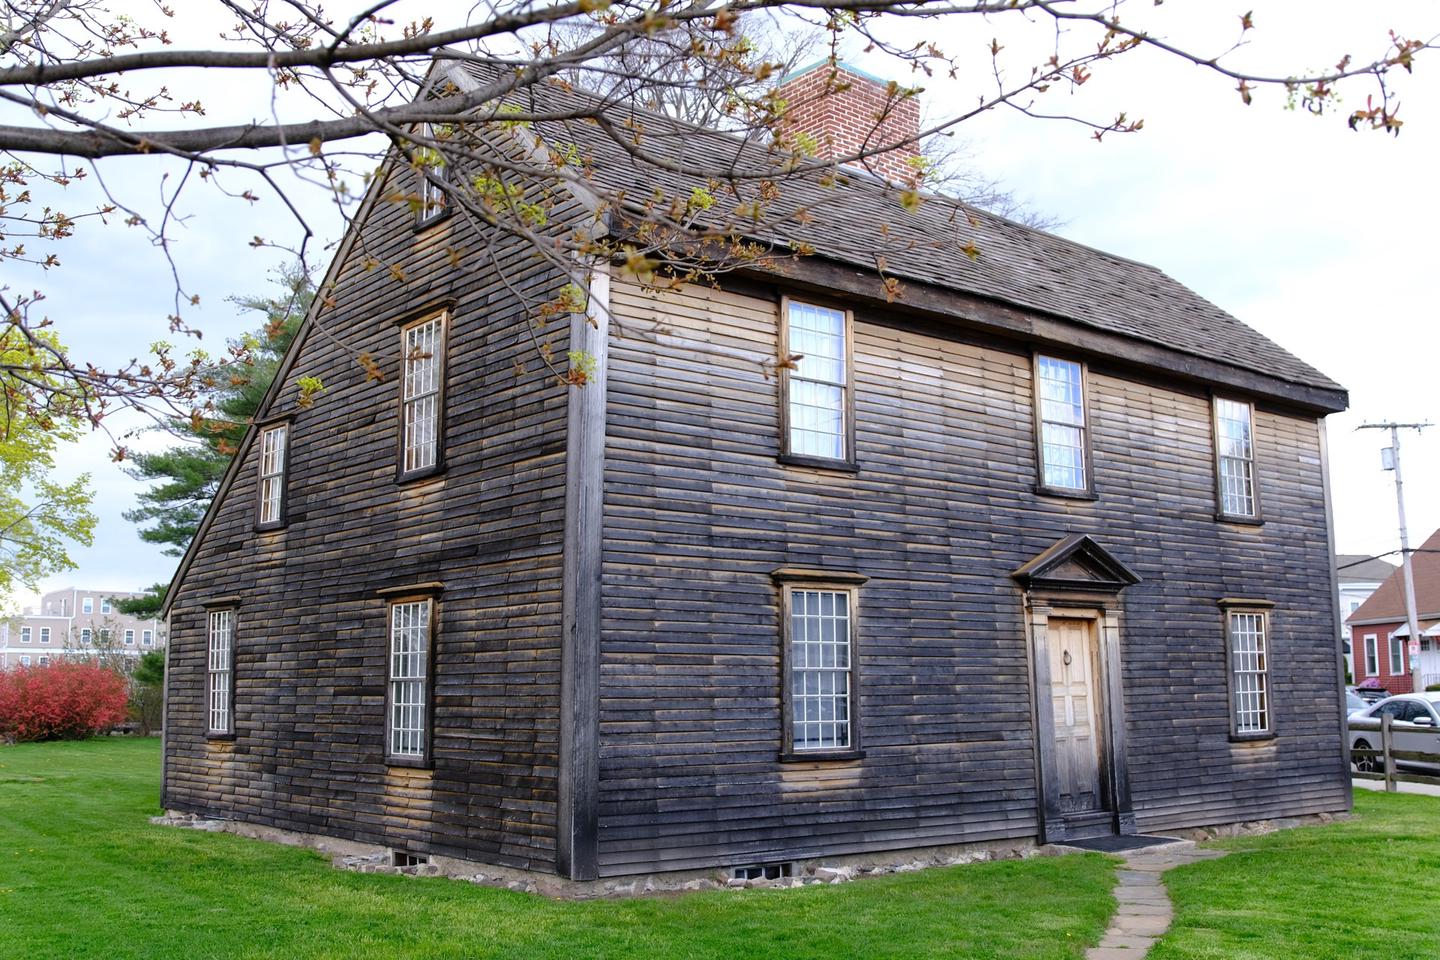 A New England "saltbox" style home with brown wood siding. The home where President John Adams was born in 1735.